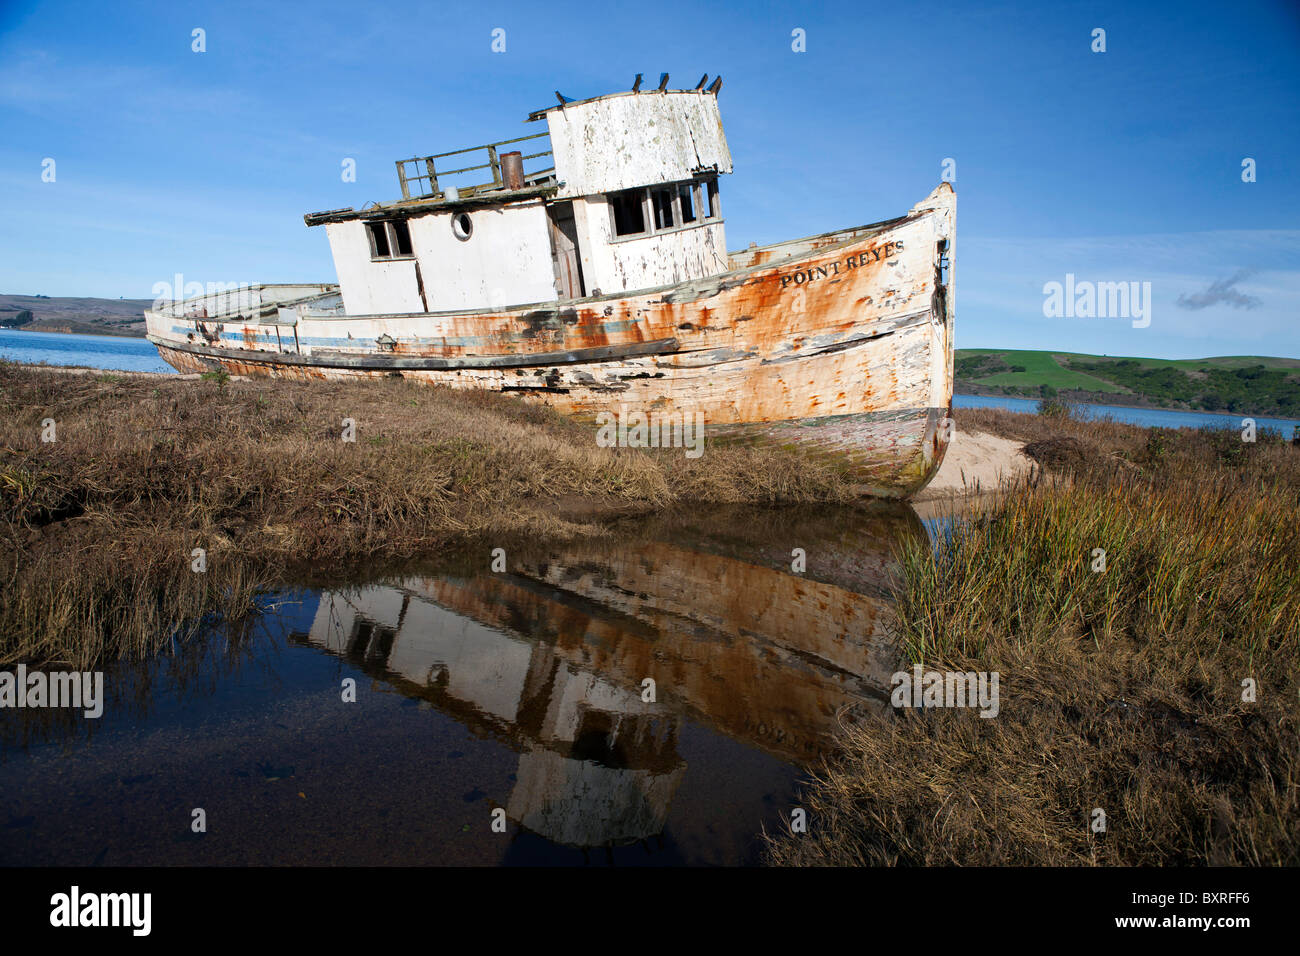 Abandoned shipwreck of the Point Reyes along the shore of Tomales Bay, near Point Reyes National Seashore, California Stock Photo